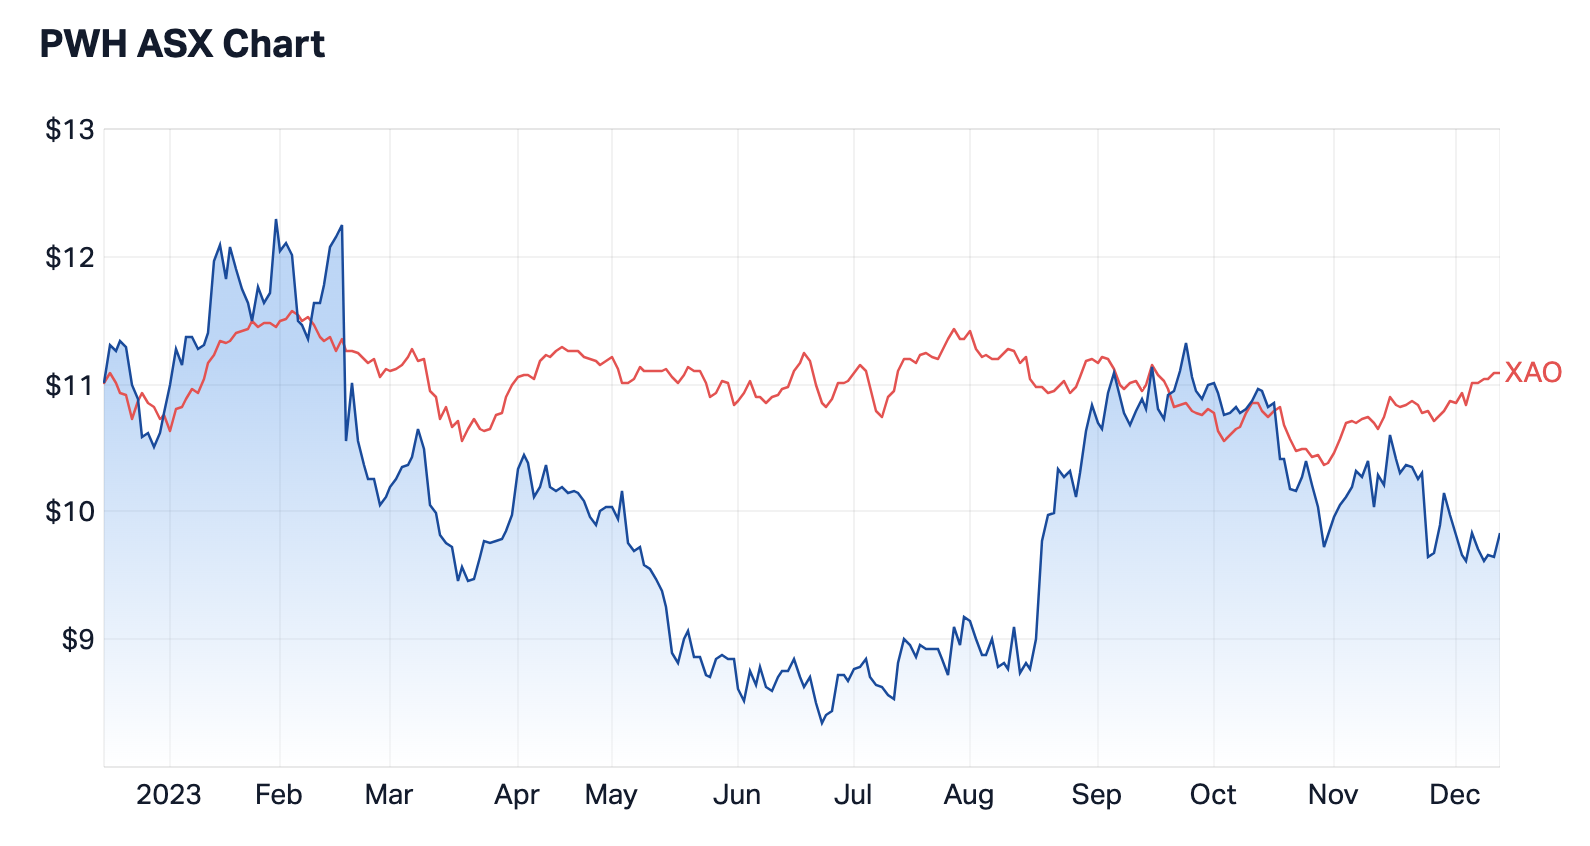 PWR Holdings shares versus the ASX All Ordinaries (as shown in red). Source: Market Index